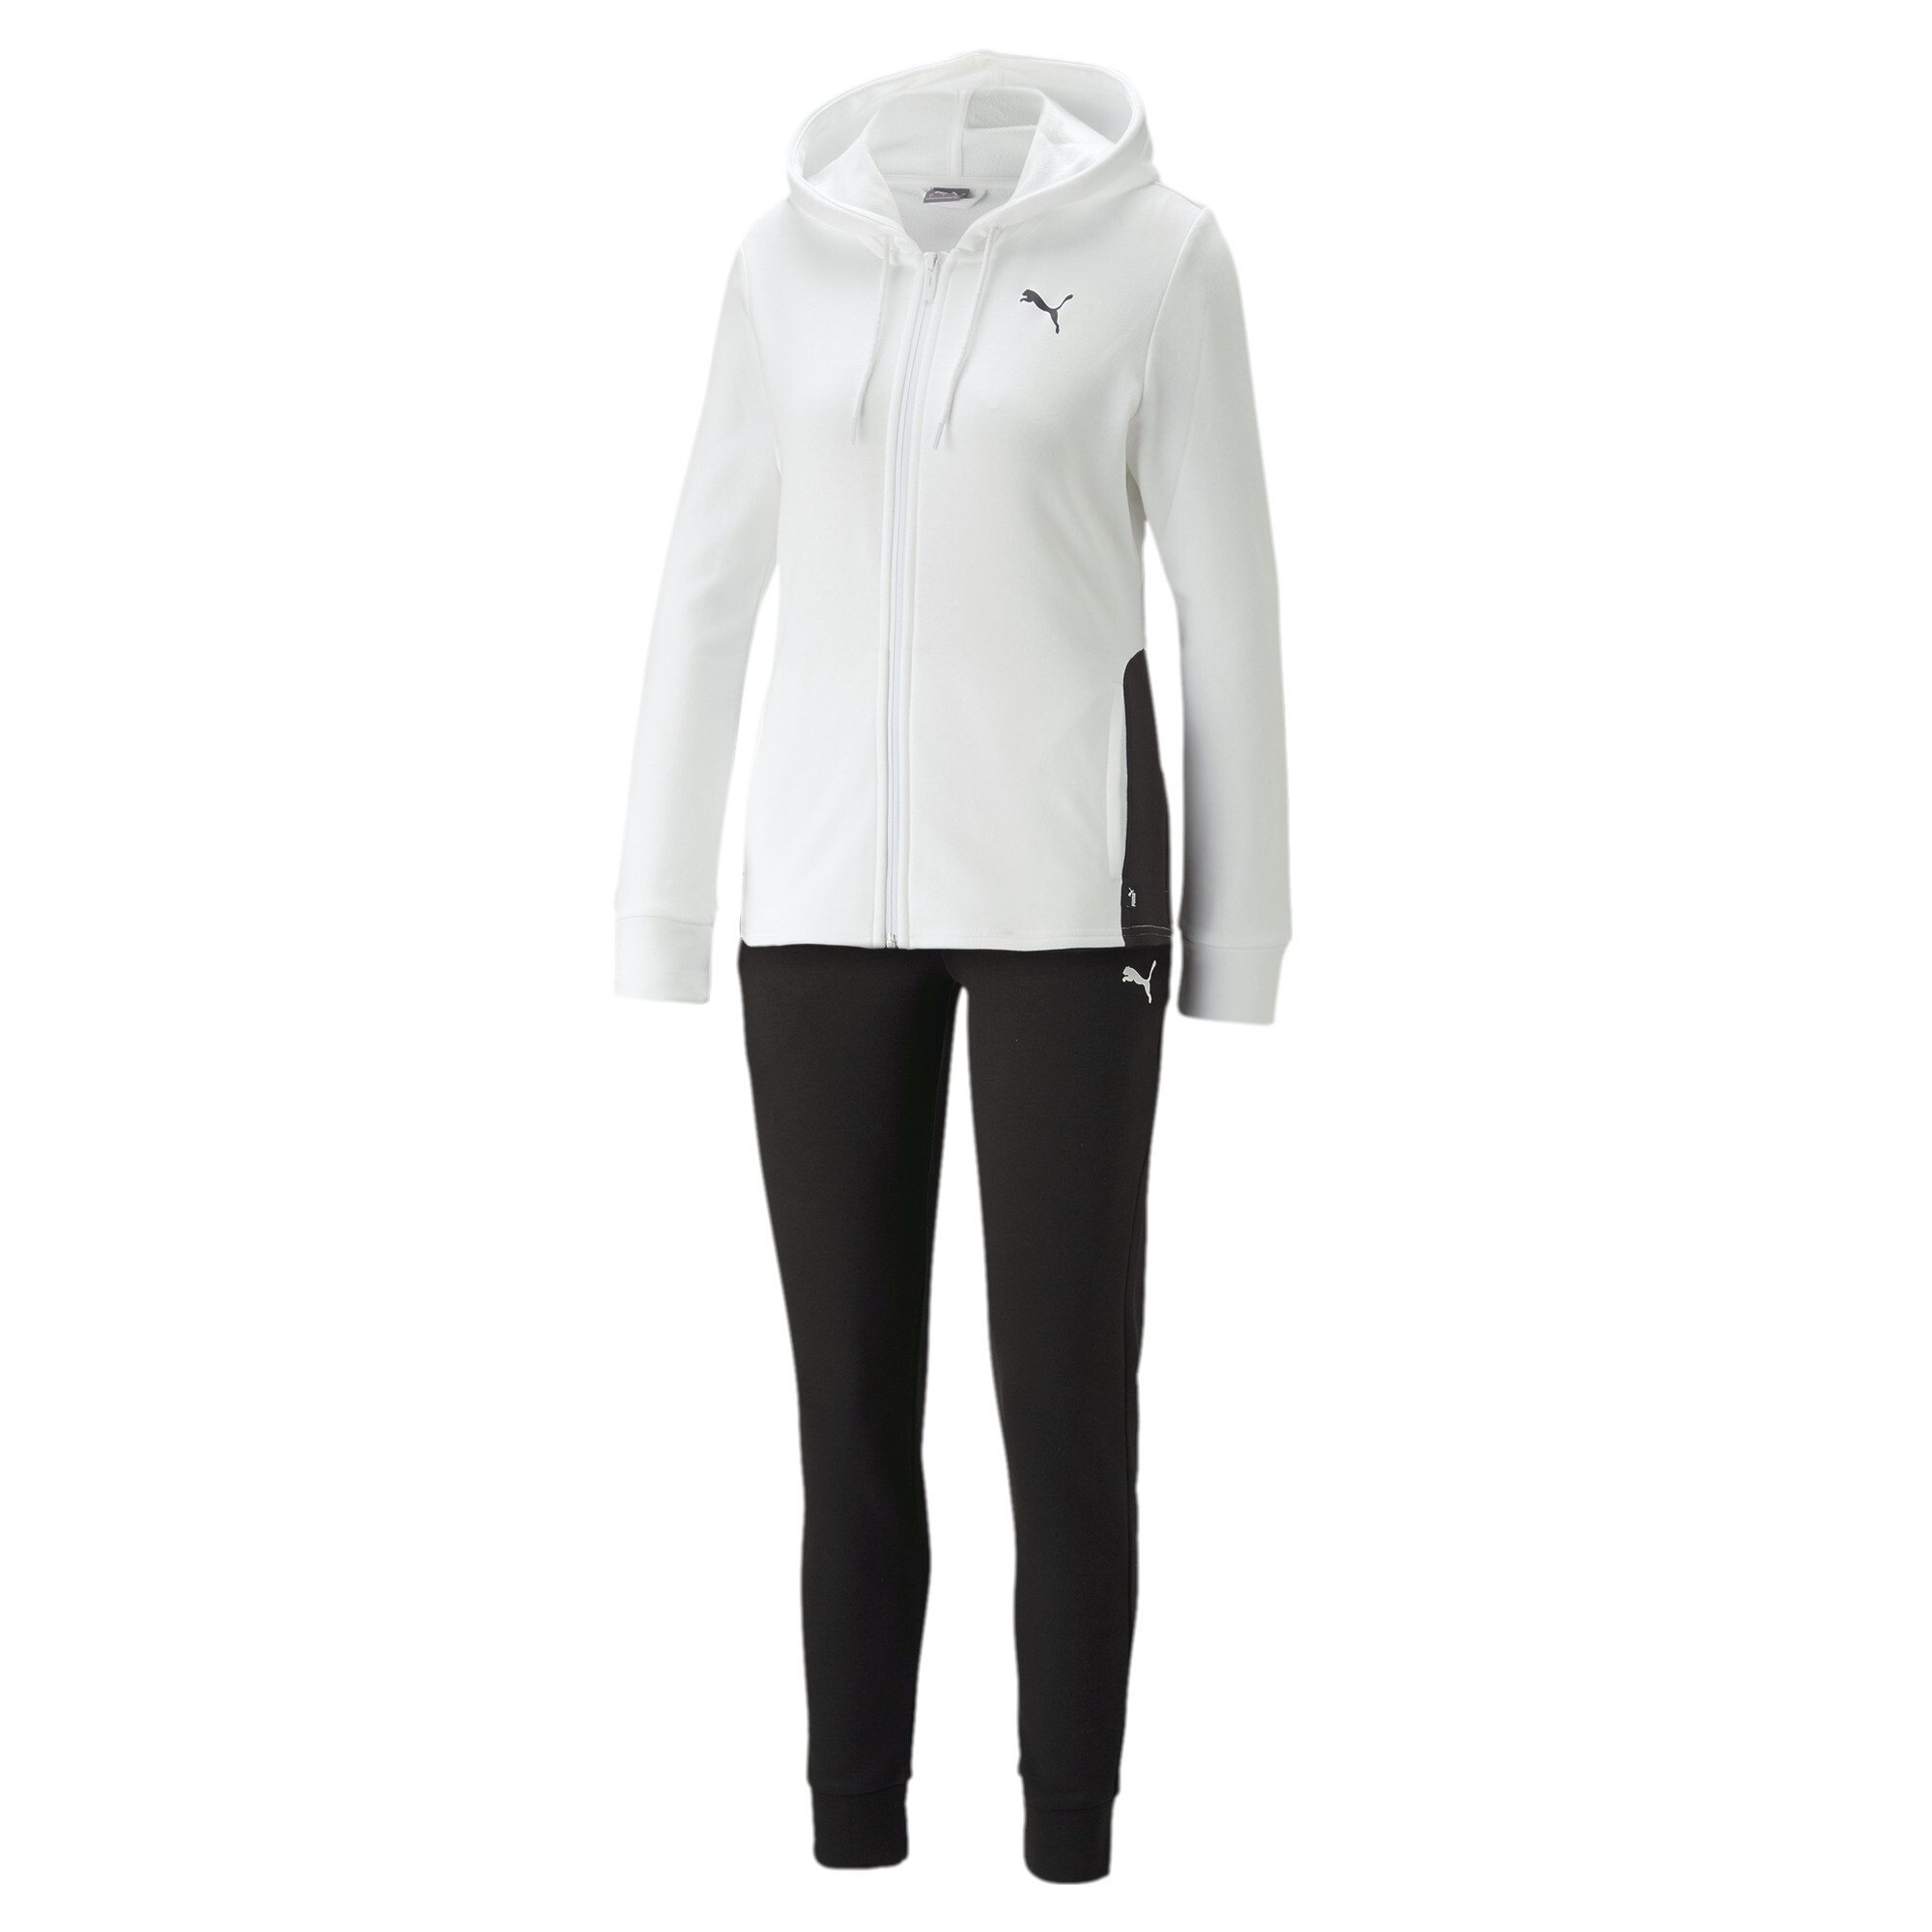 Women's Puma Classic Hooded Tracksuit, White, Size S, Clothing